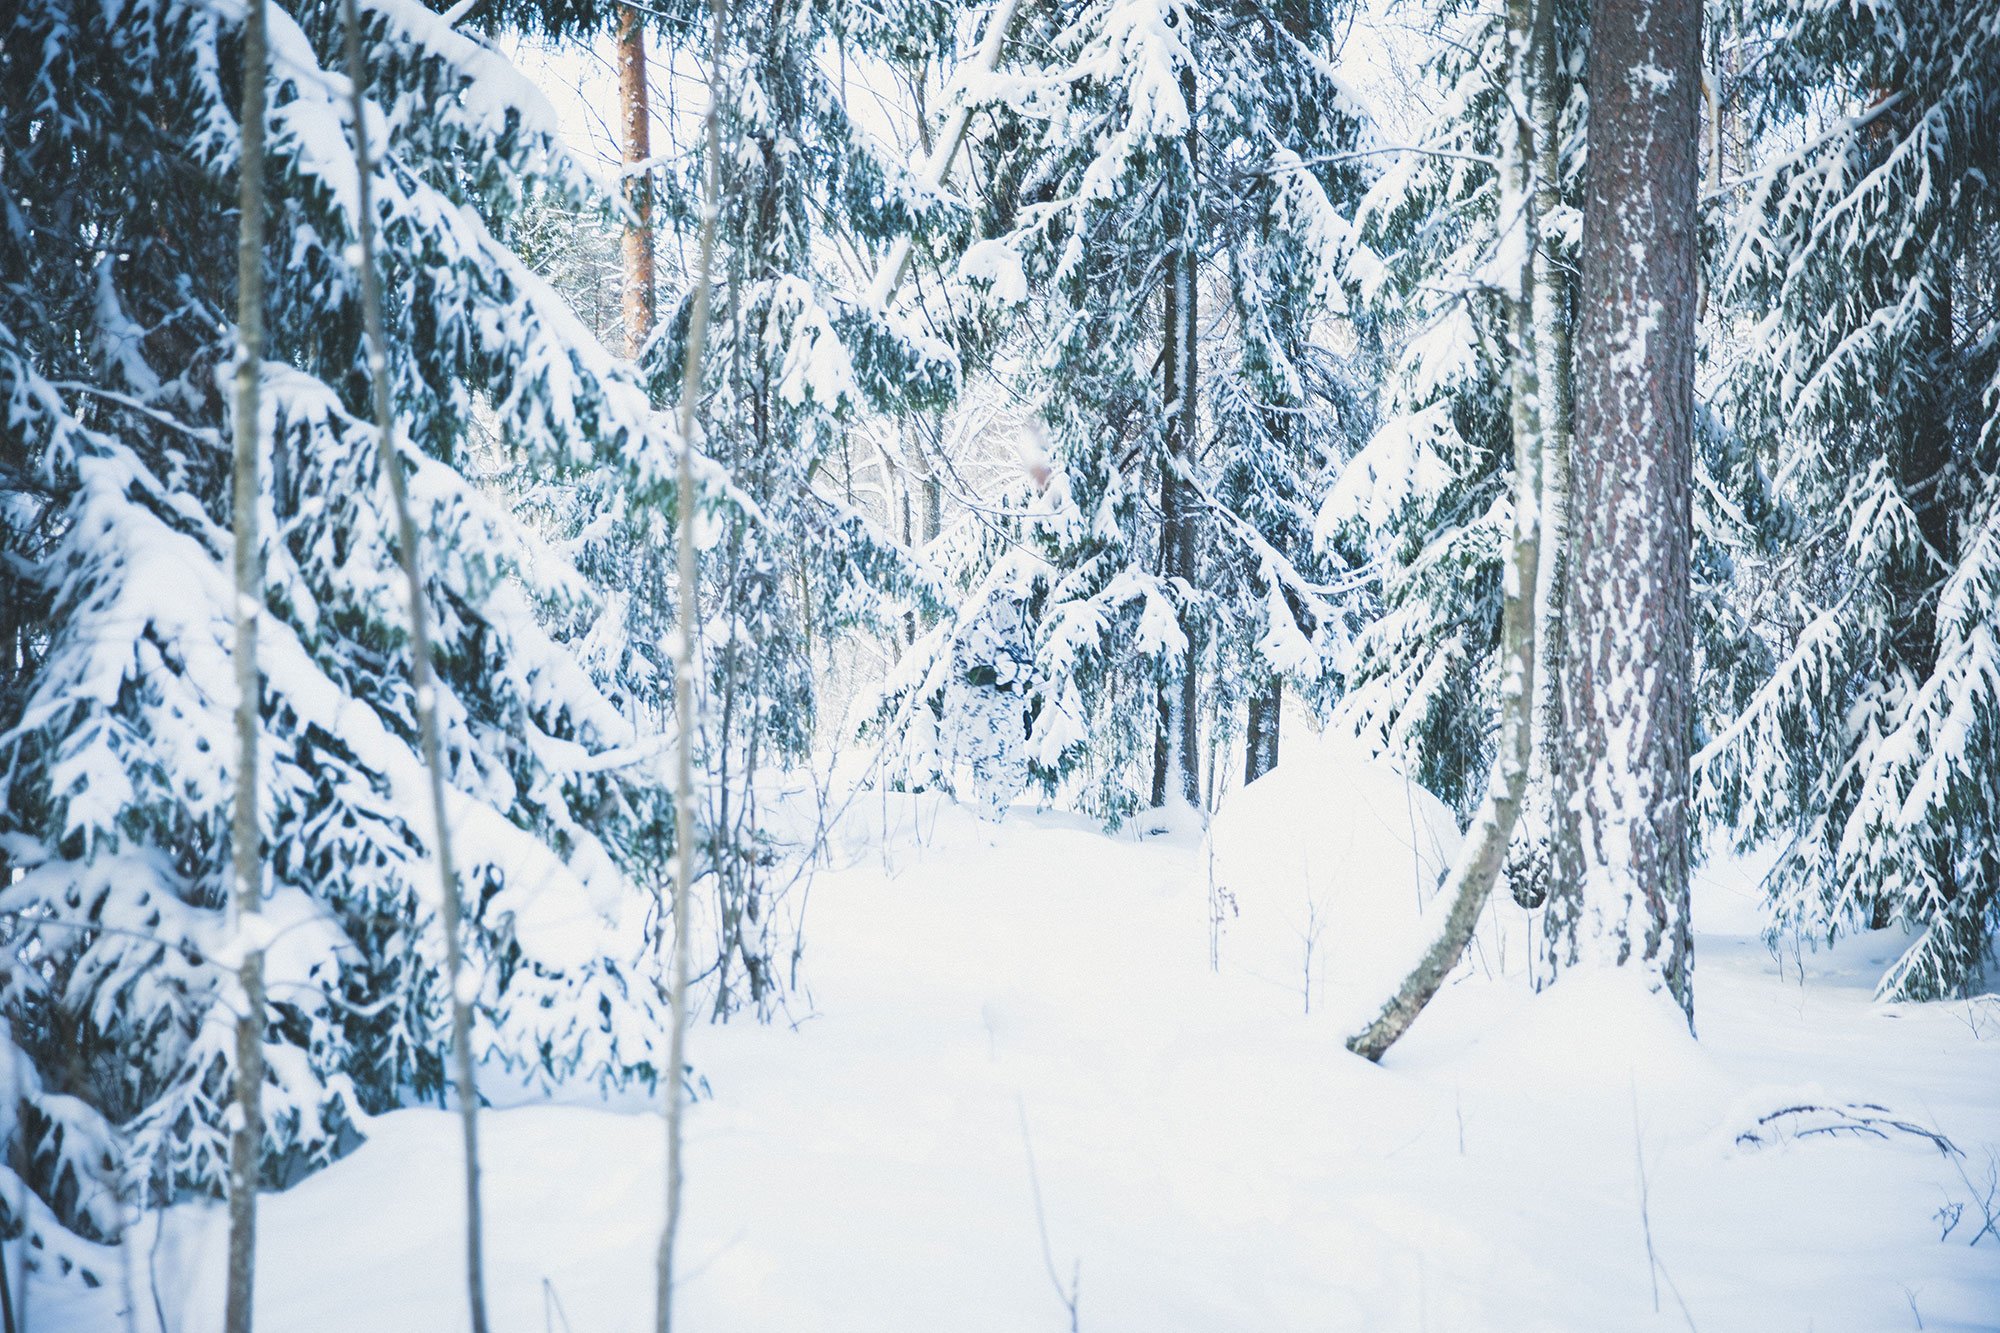 Snow camouflaged soldier disappears into the forest background